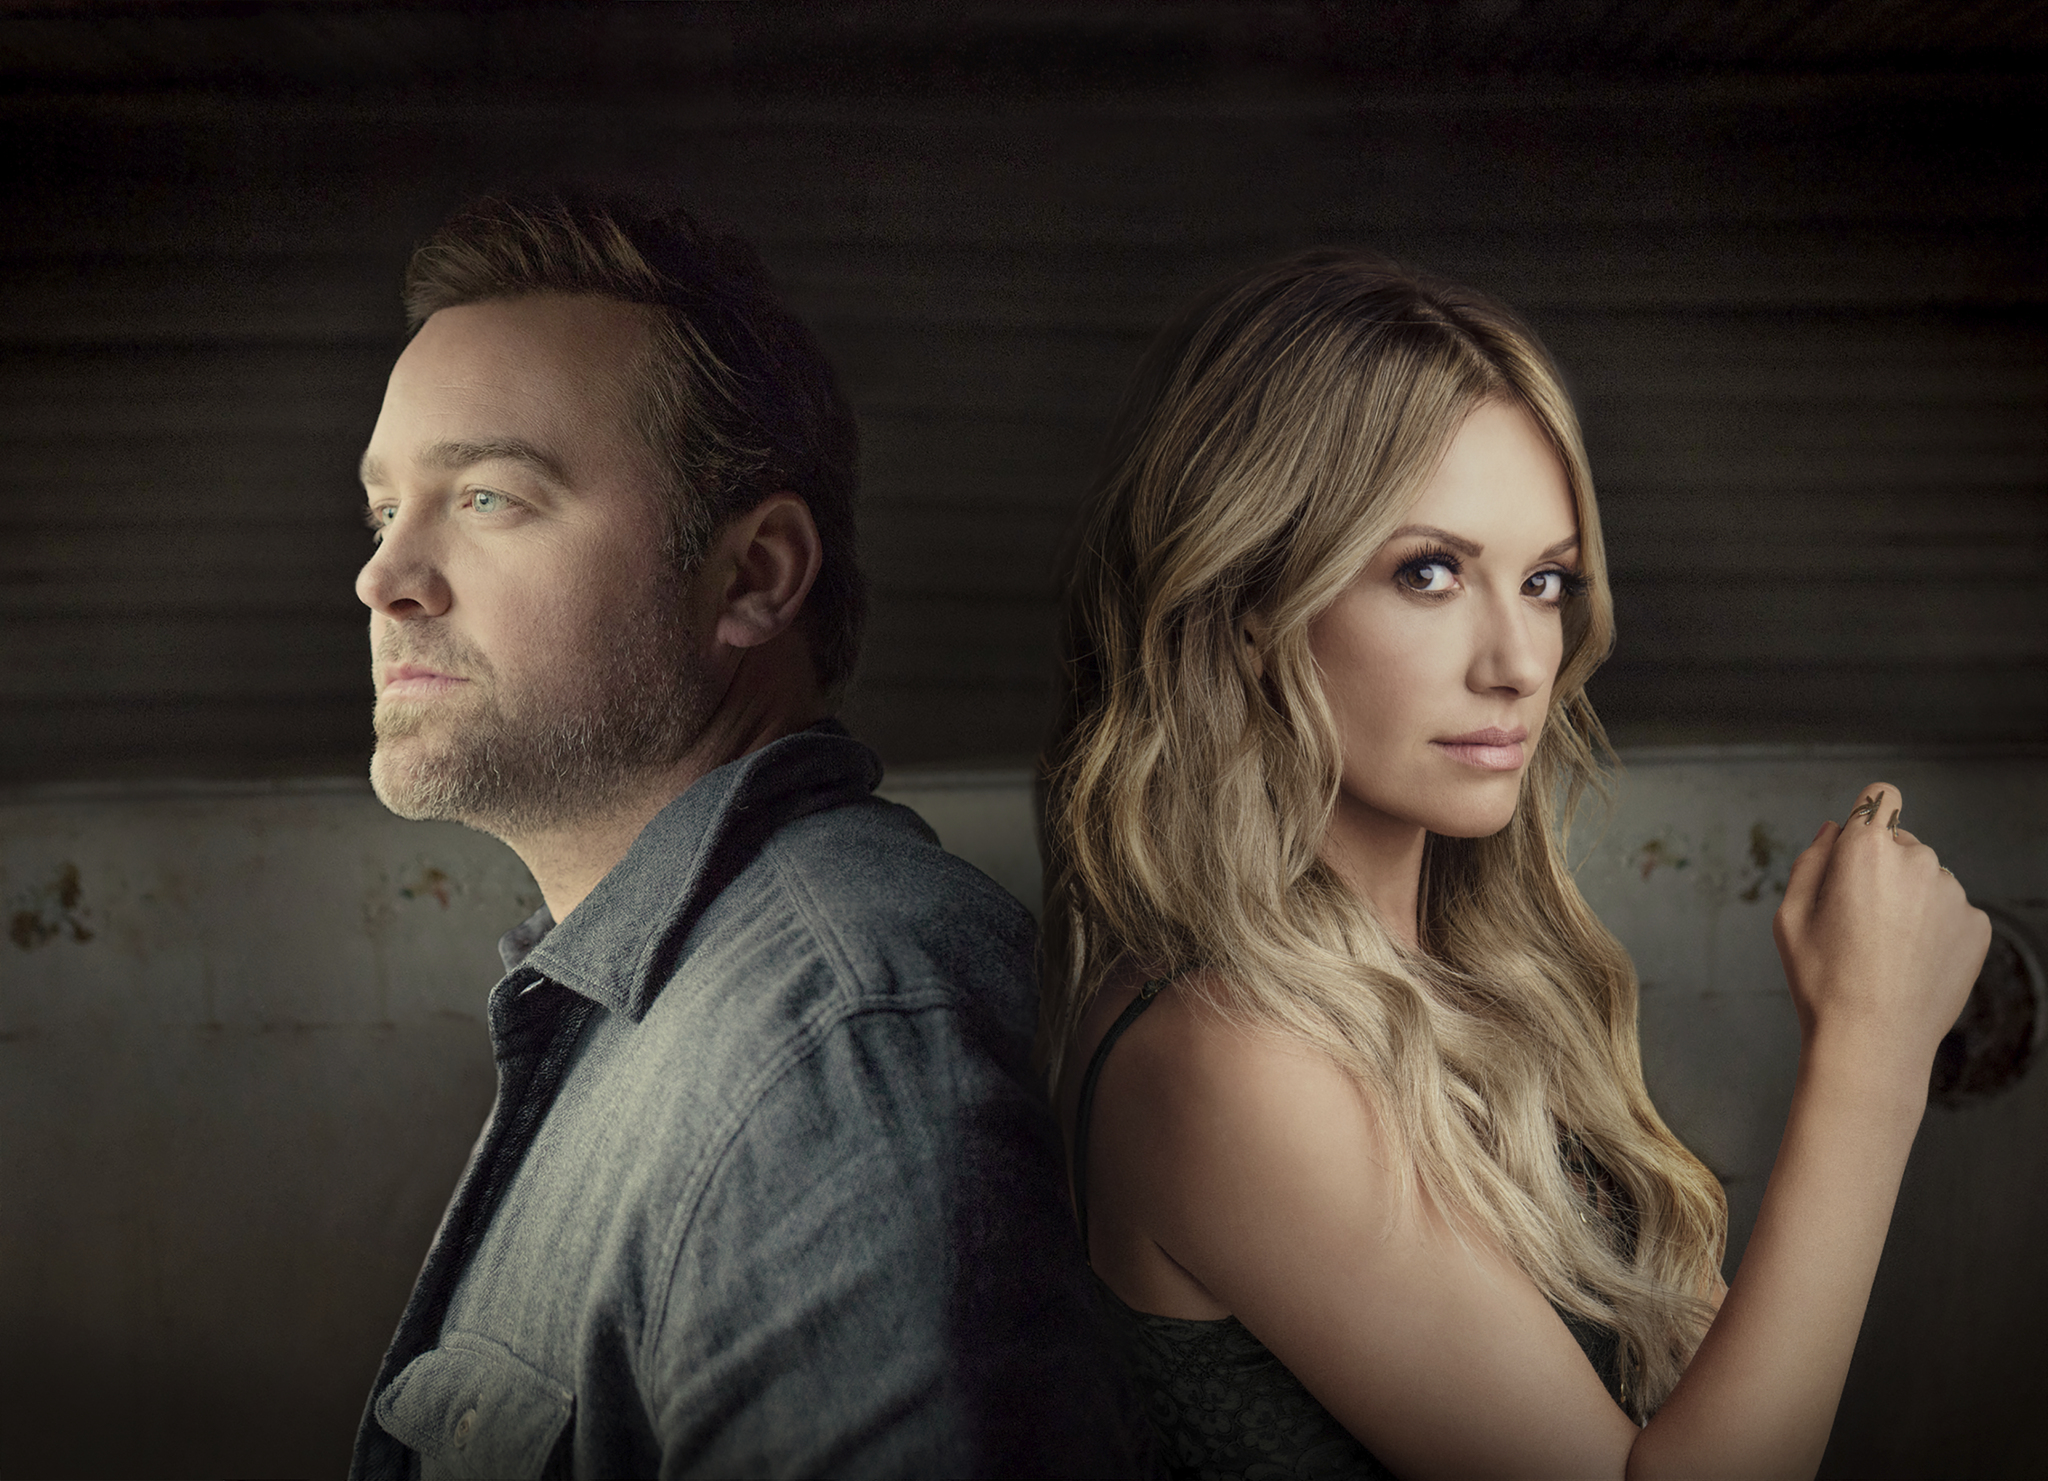 WATCH CARLY PEARCE & LEE BRICE'S “I HOPE YOU'RE HAPPY NOW” MUSIC